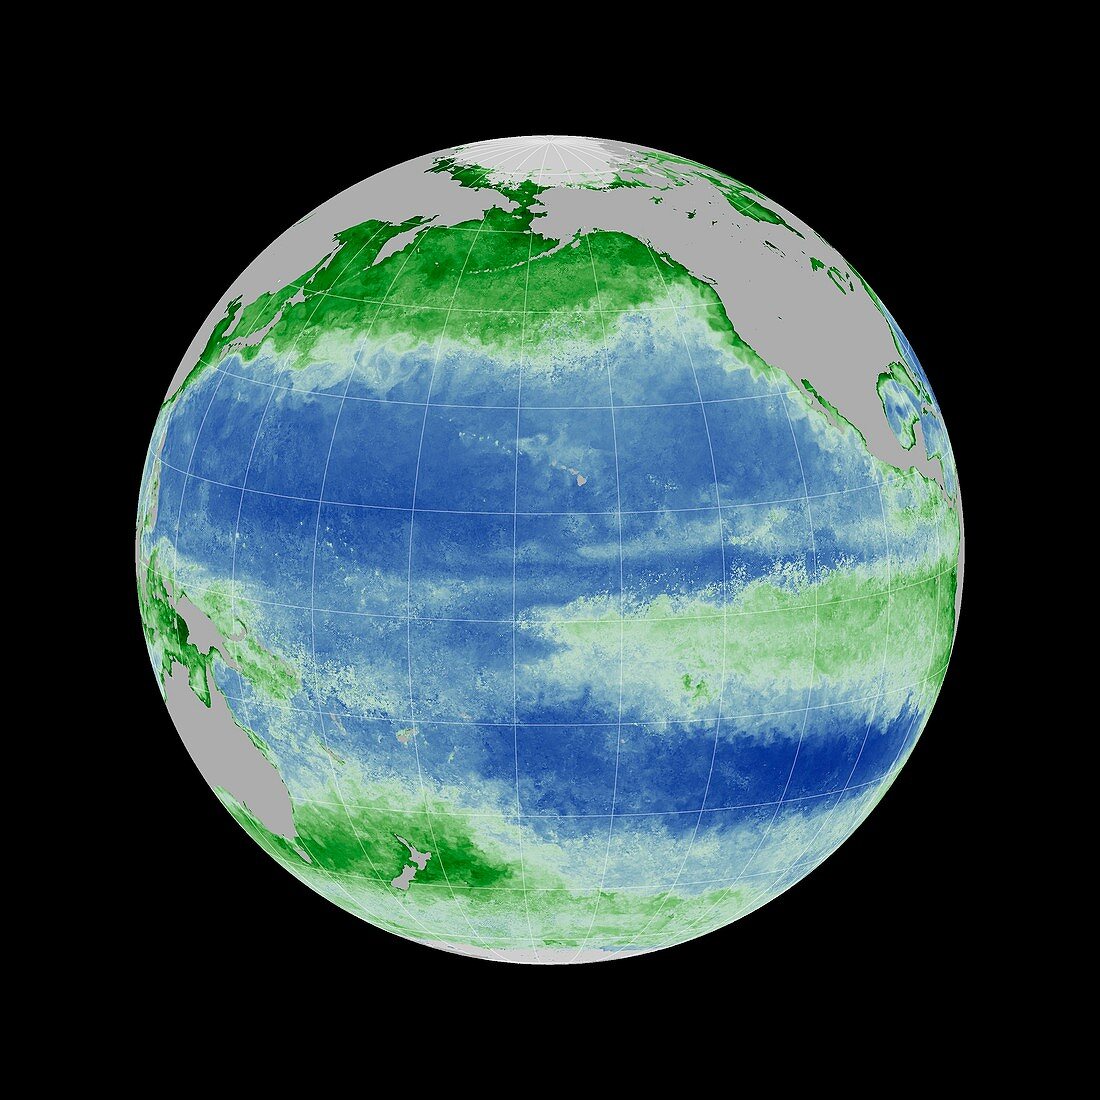 Ocean chlorophyll concentrations,2015